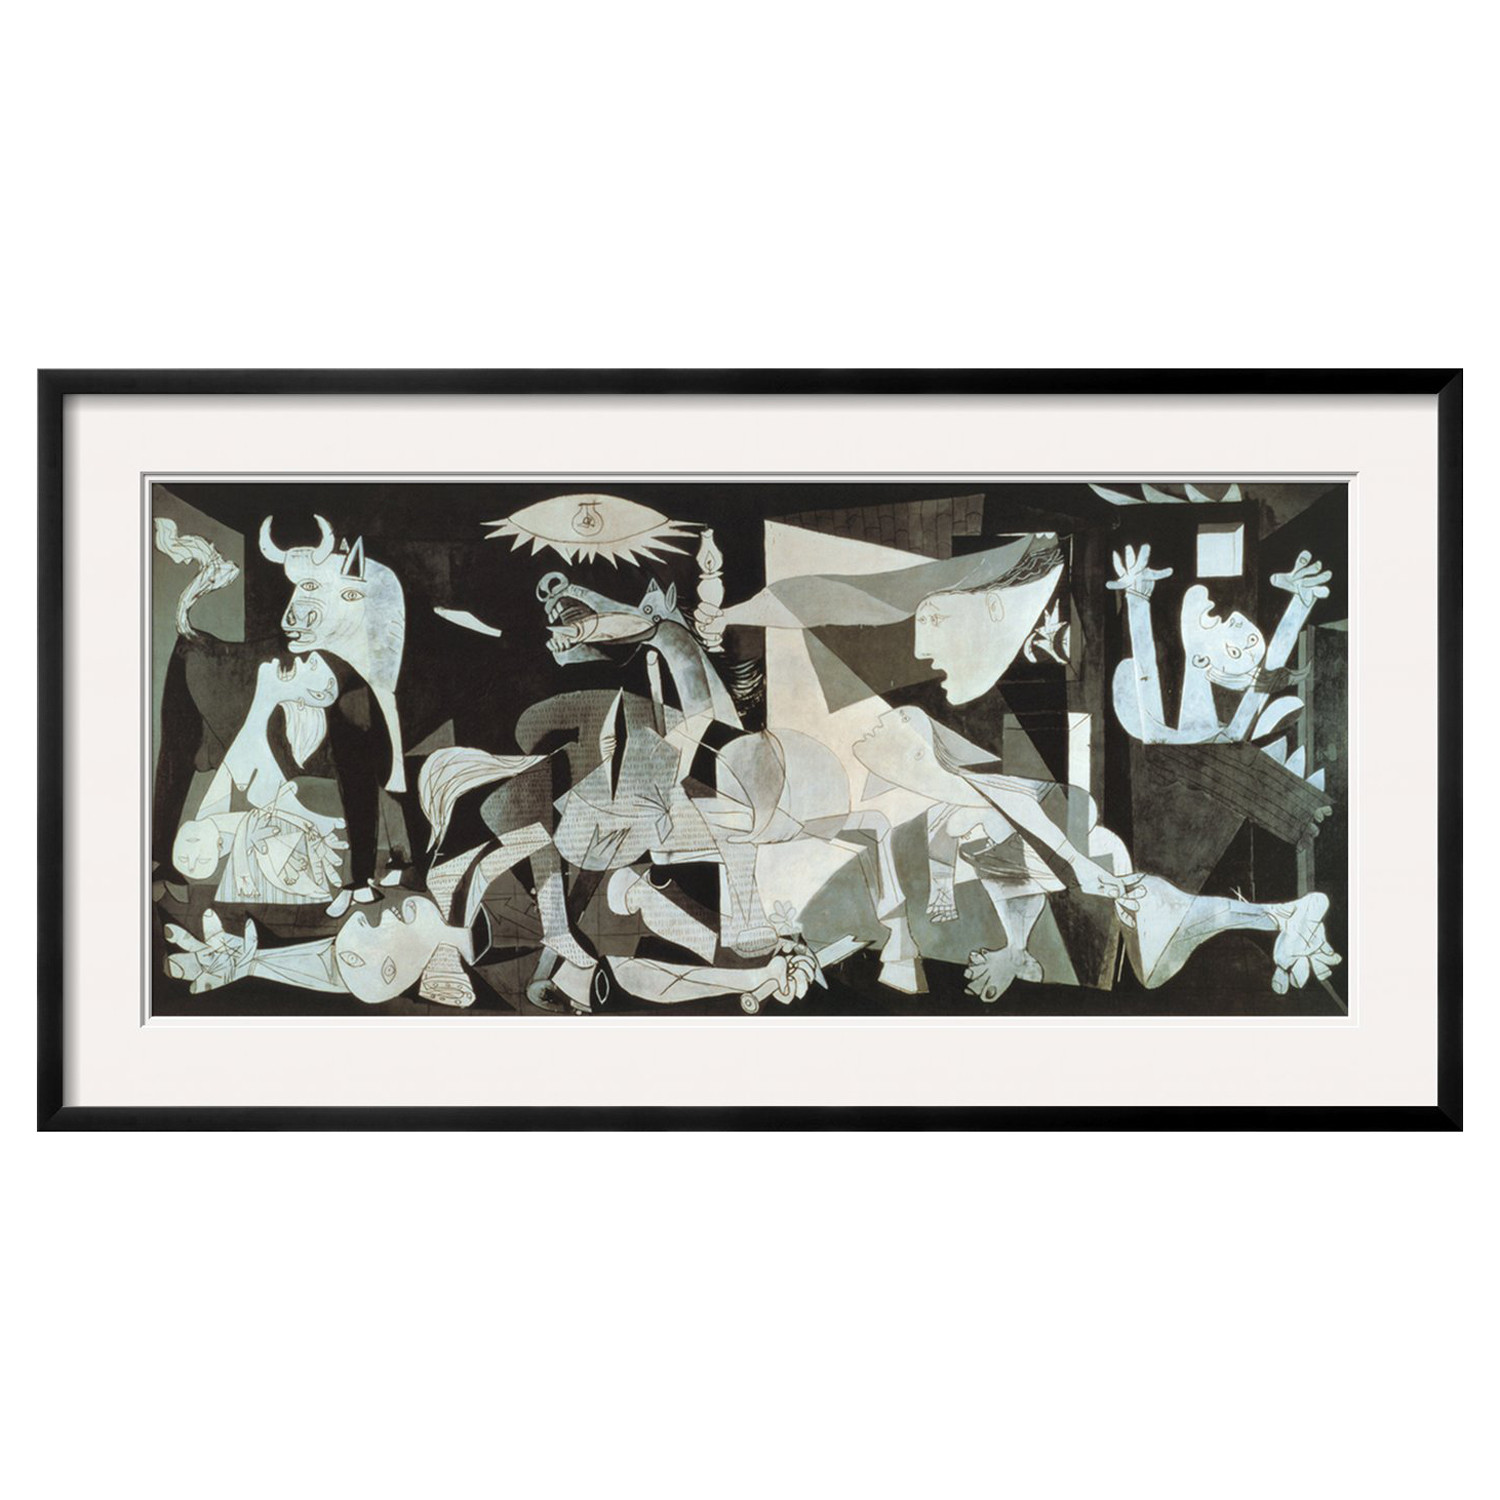 Guernica, c.1937 - Pablo Picasso - Touch of Modern